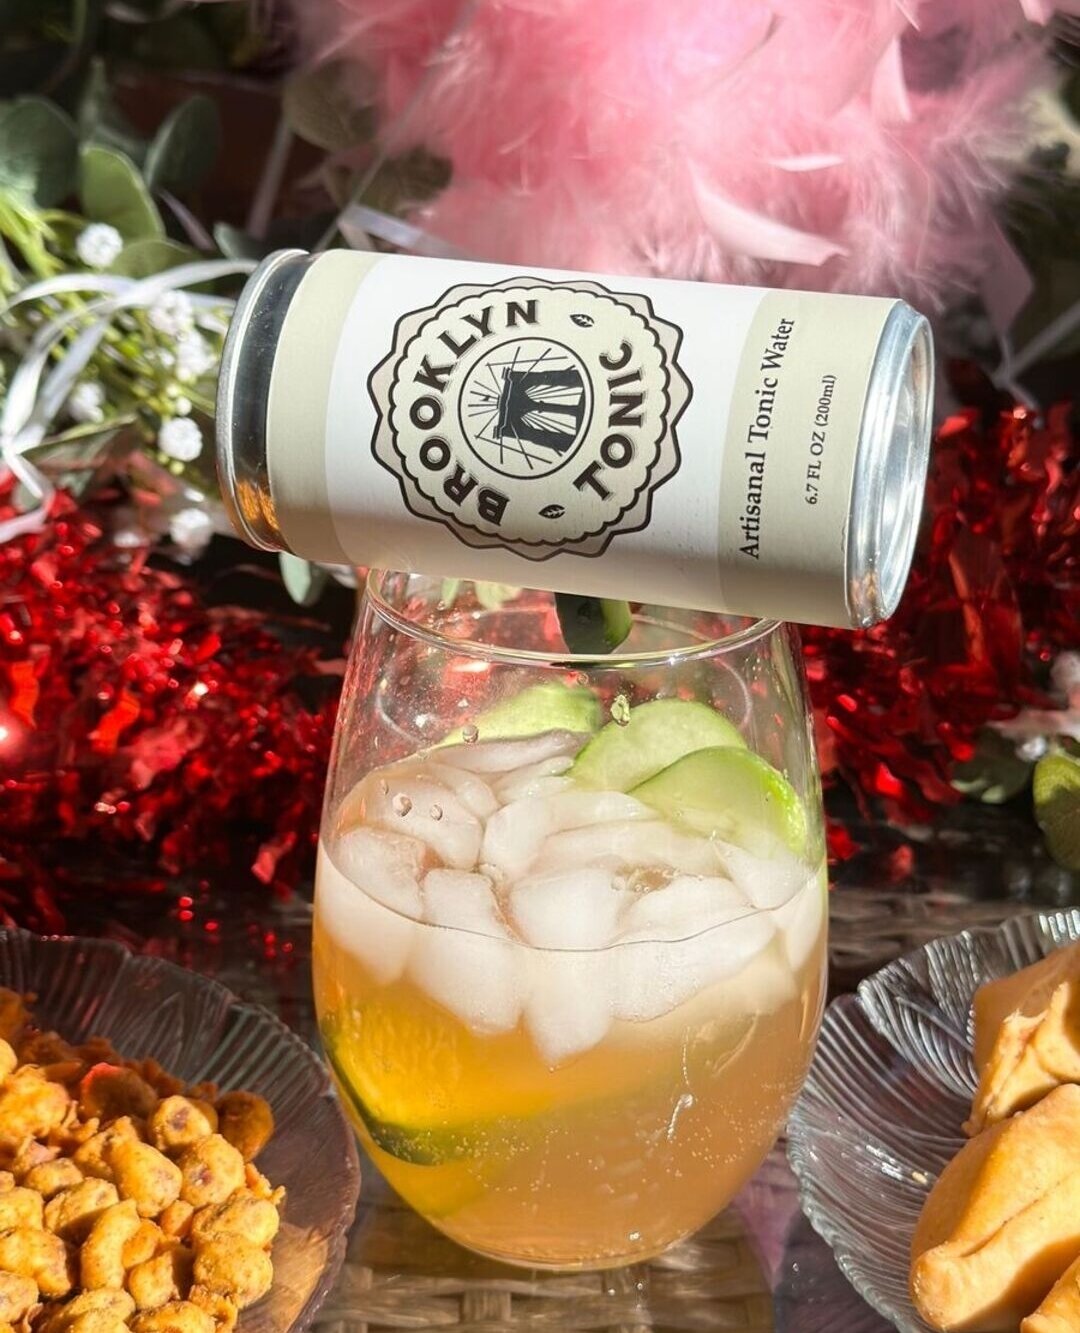 This Brooklyn Tonic mix by @maddynath2922 has got us feeling fan-ta-bul-ous! 😉⁠
⁠
Quench your thirst on these humid days with a nice cucumber G&amp;T. Make it with Brooklyn Artisanal Tonic Water, or try it with our syrup to customize the level of BT